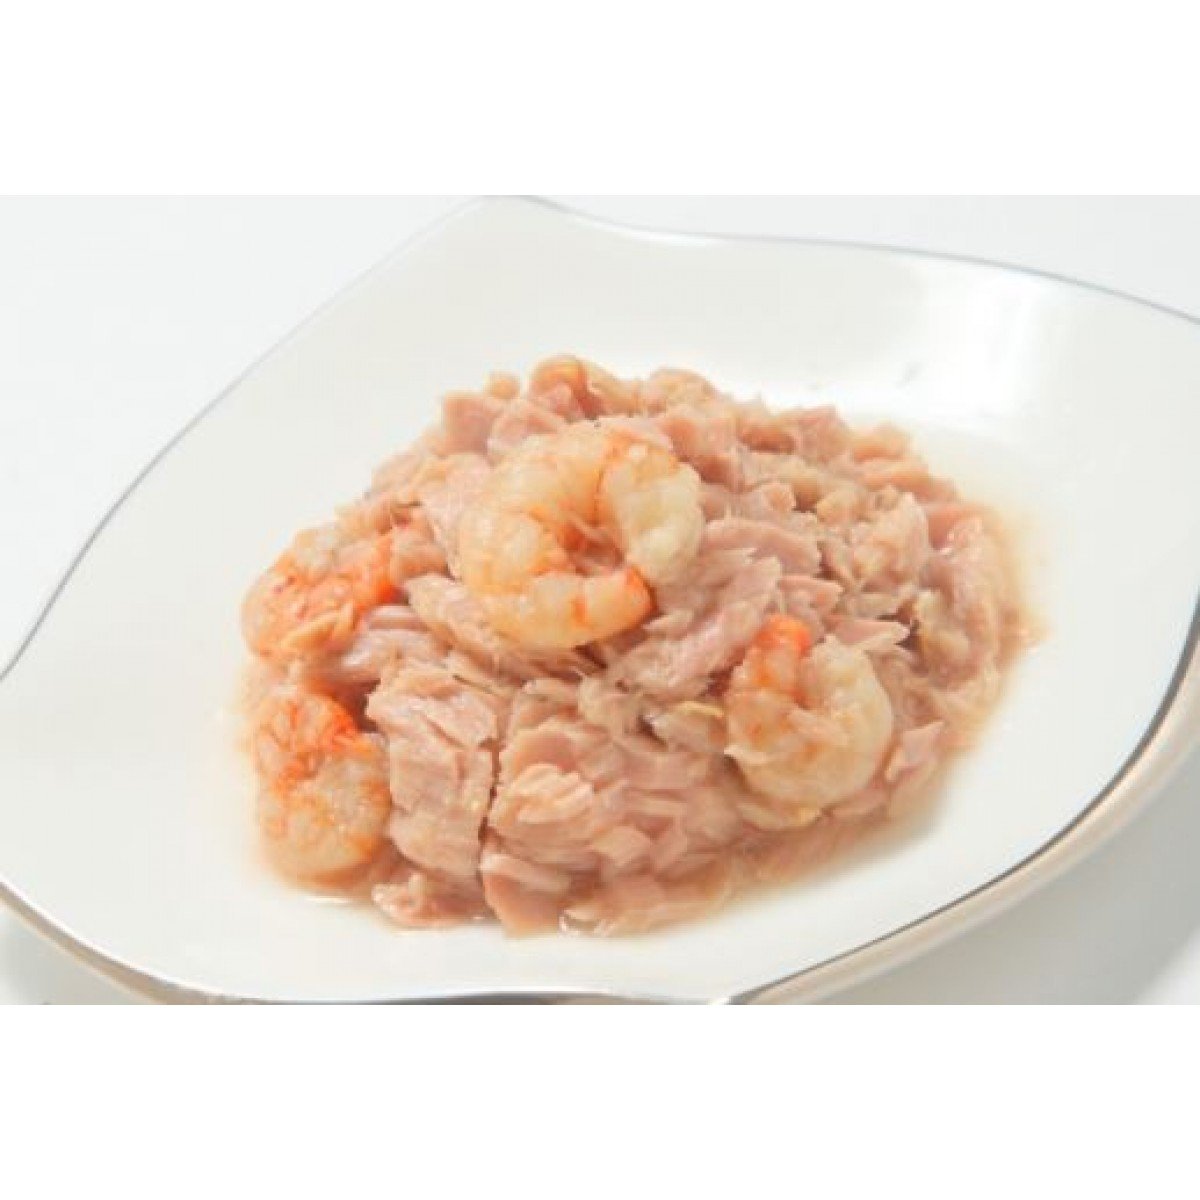 Kakato - Tuna & Prawn (Dogs & Cats) canned from Vetopia Online Store